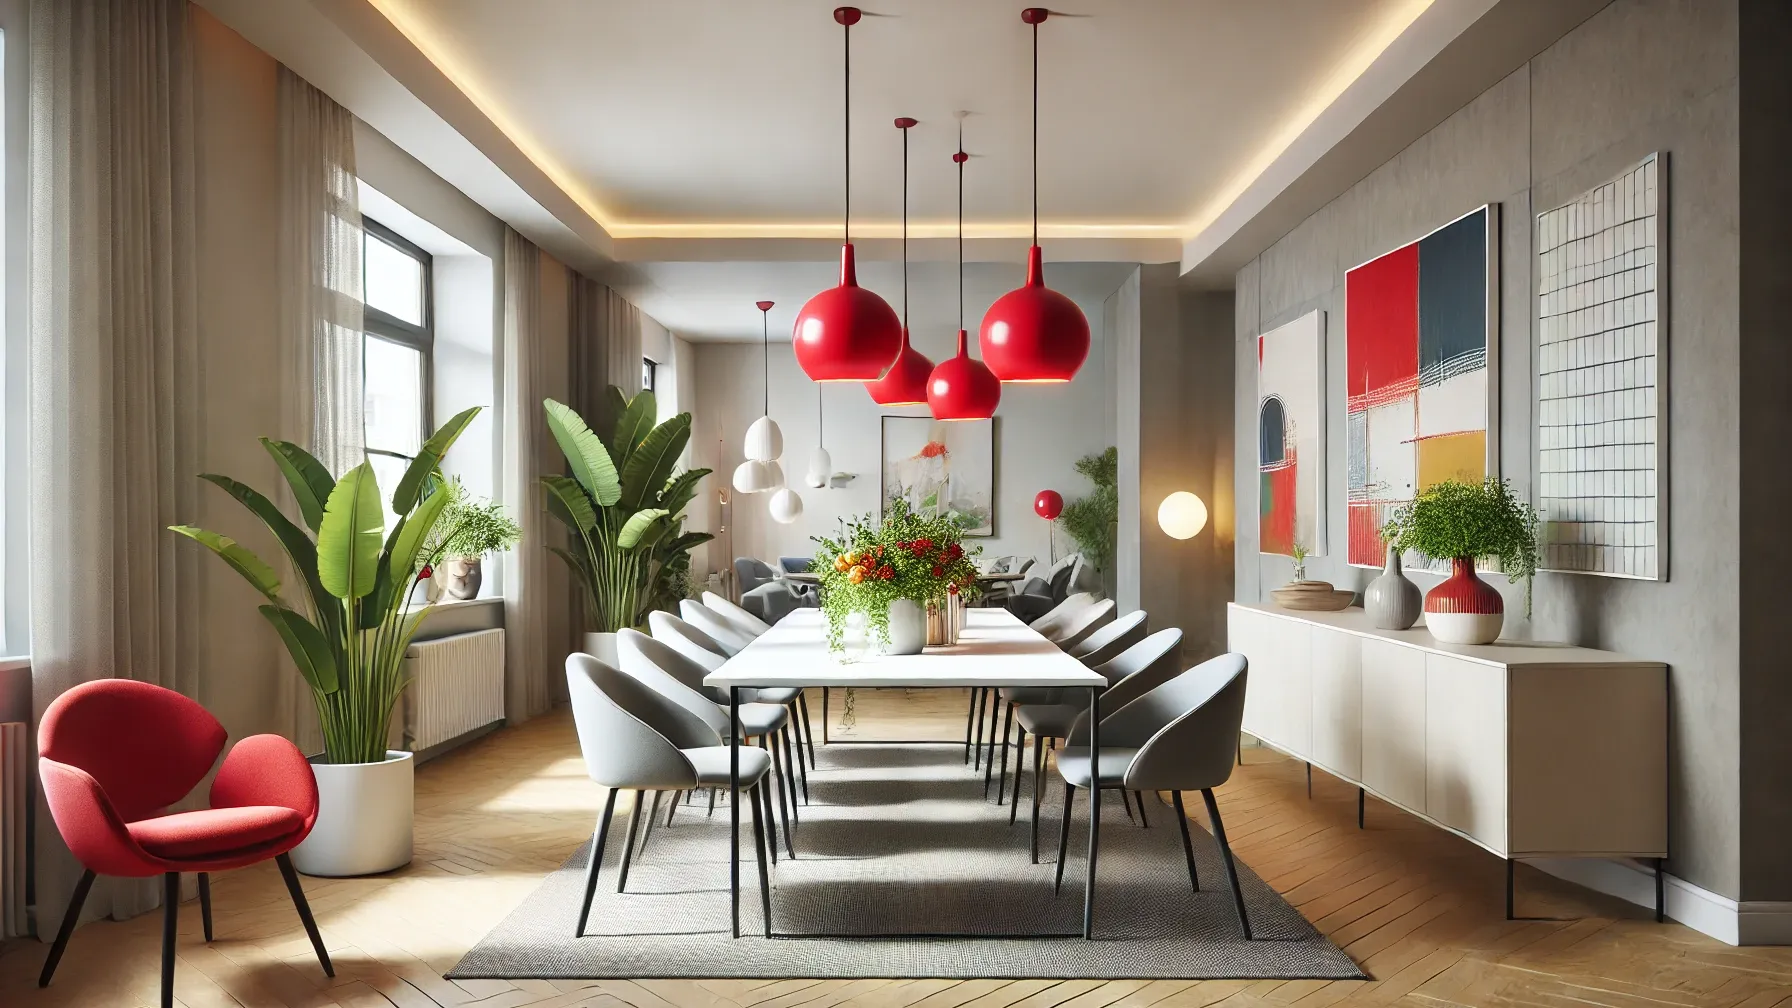 A photorealistic contemporary dining room highlighting the use of accent colors and accessories